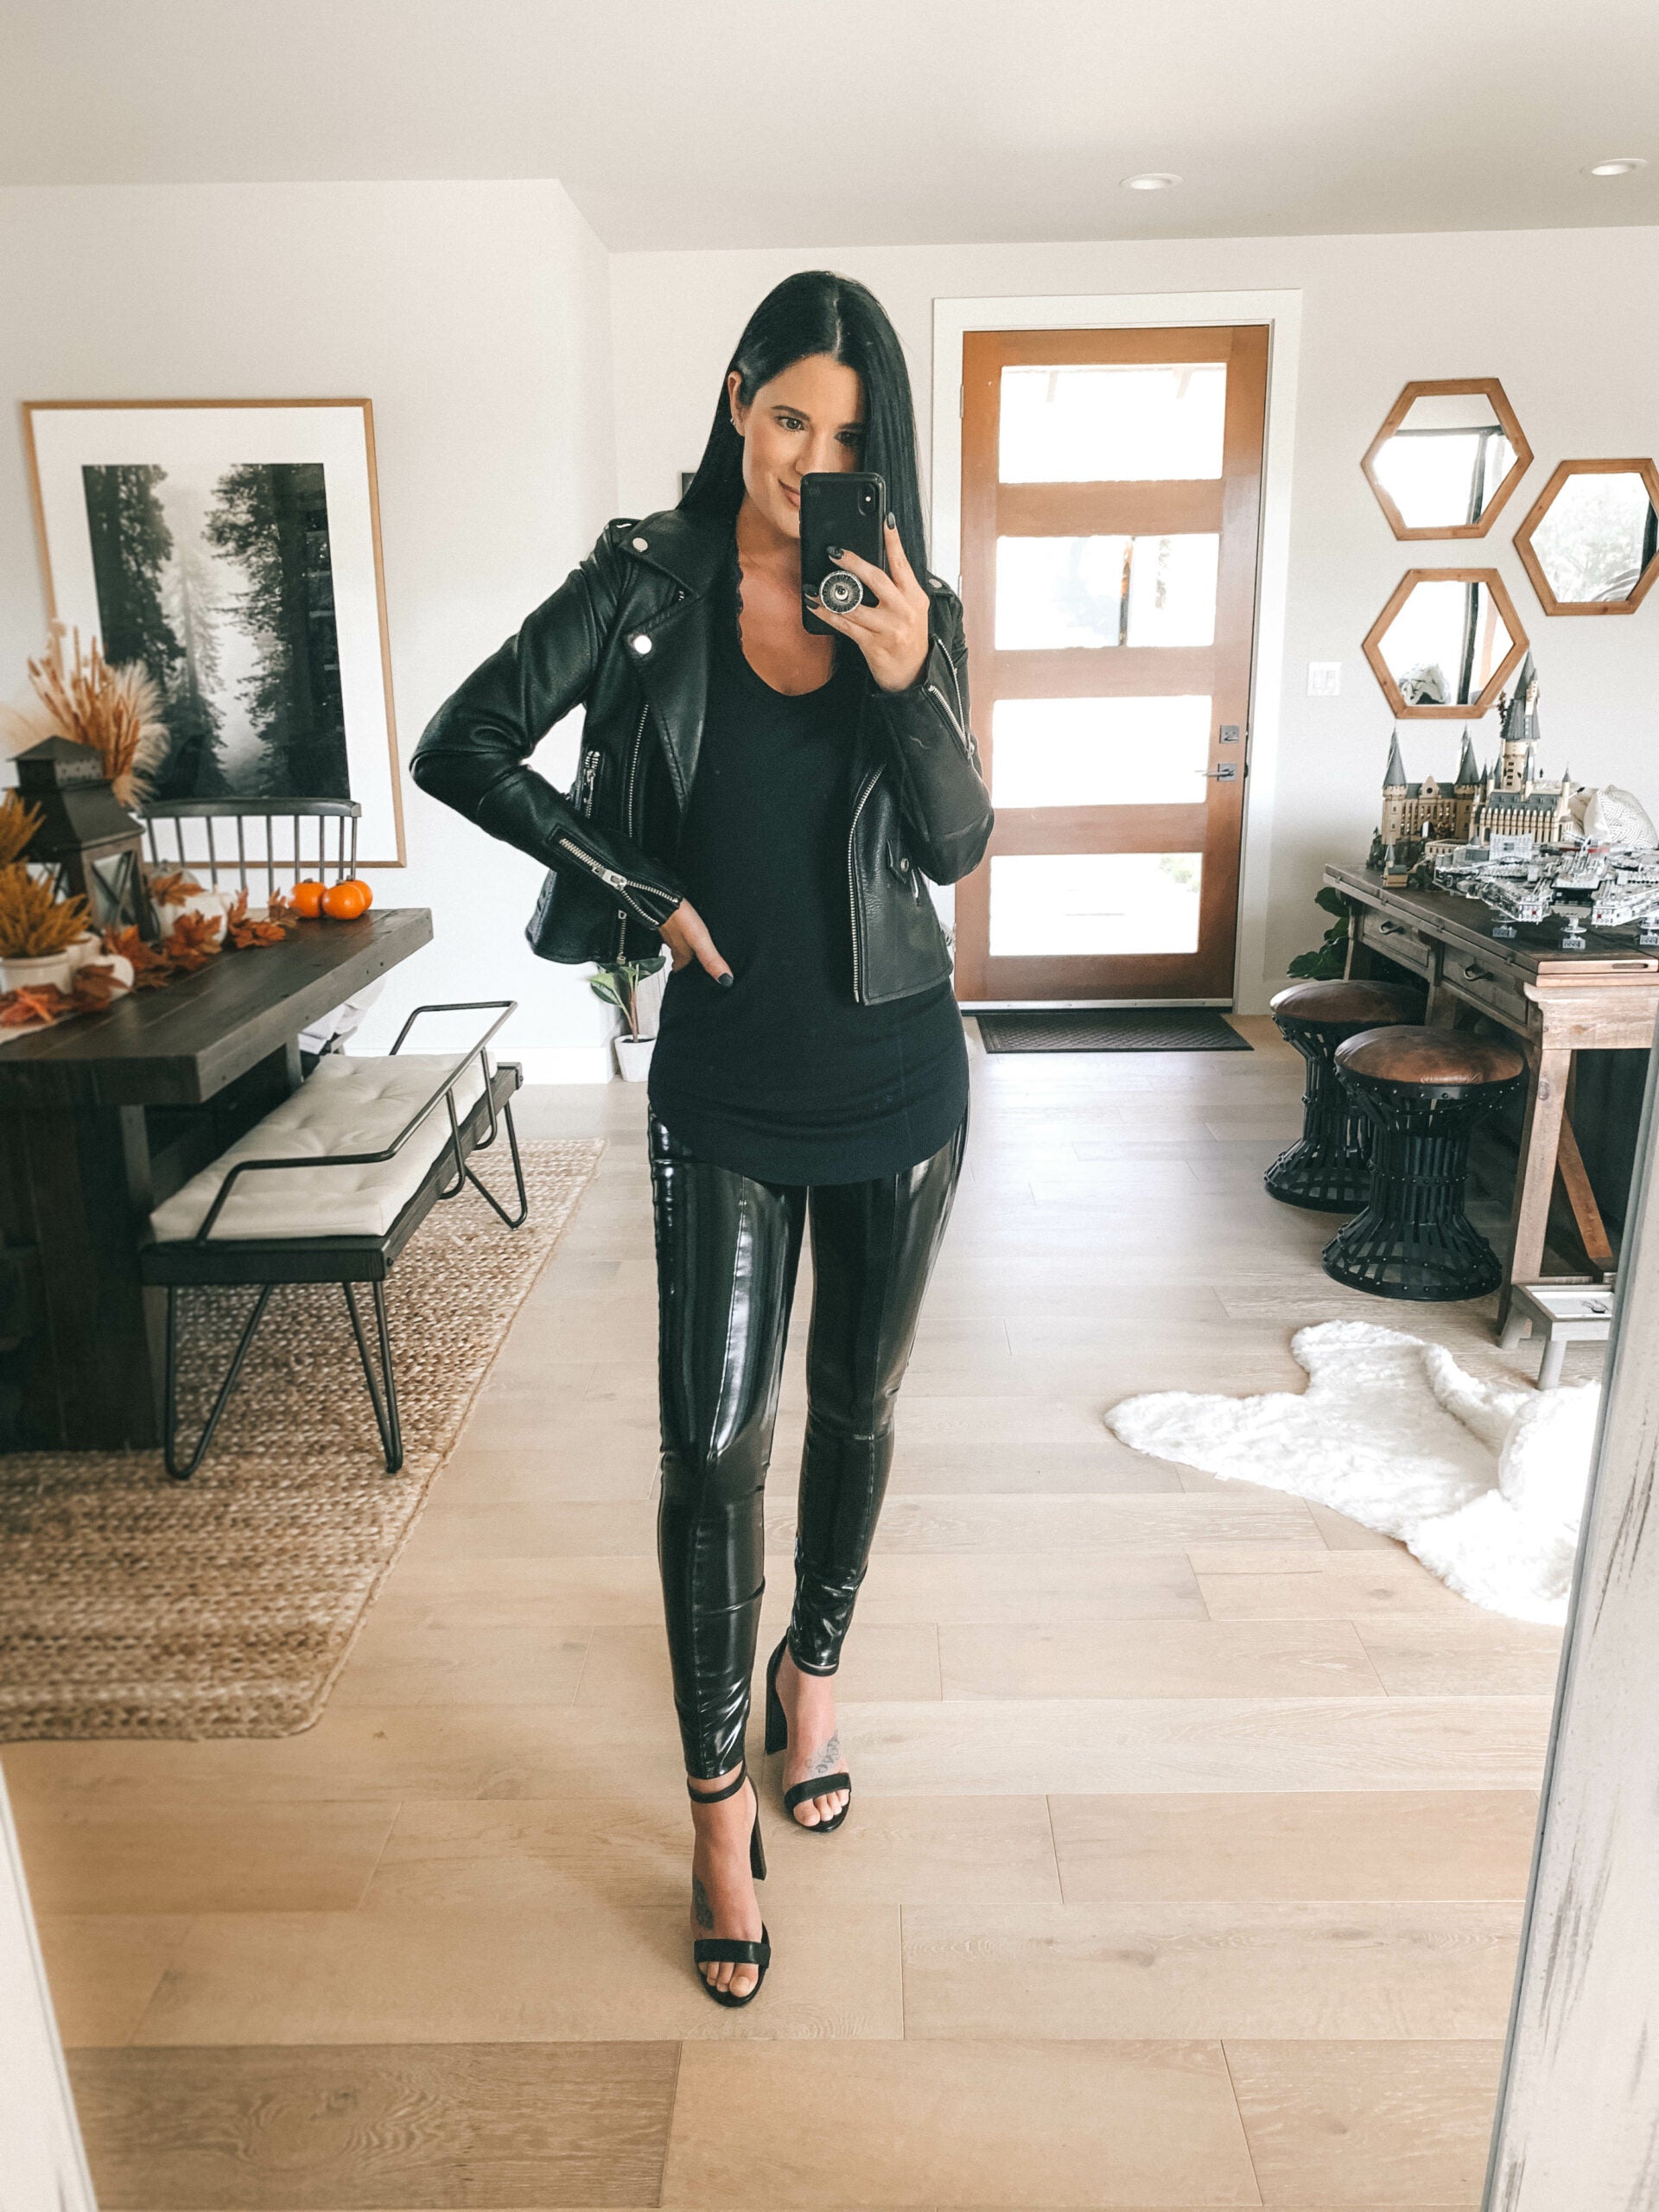 HOW TO STYLE LEATHER LEGGINGS  4 WAYS to WEAR Leather Pants - LOOKBOOK +  Outfit Ideas 